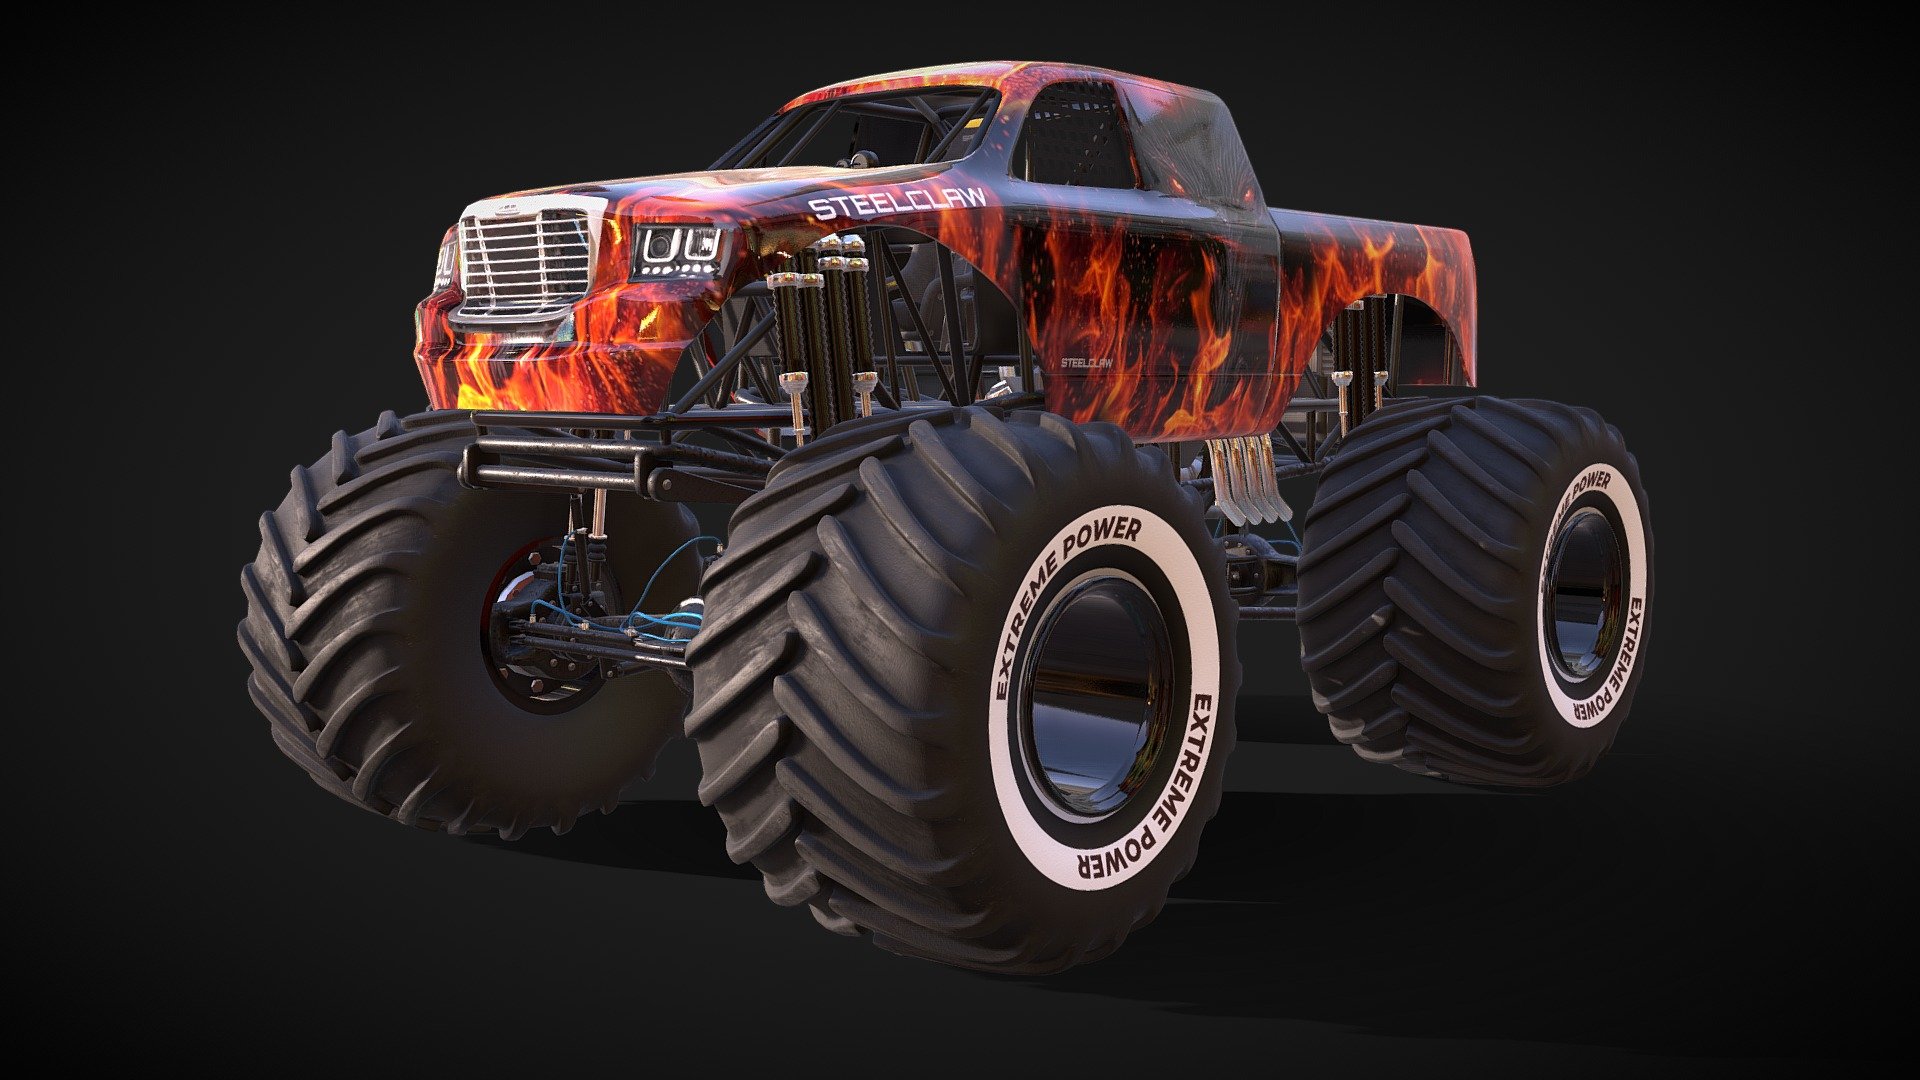 This is Unreal Engine Asset

Buy on Marketplace Page: https://www.unrealengine.com/marketplace/en-US/product/drivable-mtruck-steelclaw

Monster truck with monster truck driving style. High quality 3D Models and Skins are available. 


Technical Details



HIGH POWERED ( HIGH TORQUE )

DETAILED HIGH QUALITY ENGINE MESH READY

ANIMATED ENGINE PROPELLERS

SOFT SUSPENSIONS

SMOOTH CAMERA TRANSITIONS ( LEFT - RIGHT - BACK &amp; CORNERS )

AUTO CENTERING CAMERAS - FRONT AND BACK

5 BODY SKINS

BODY CAGE ( PIPES ) CHANGABLE COLORS

INTERIOR READY

PHYSICS BASED ANTENNA

COCKPIT CAMERA READY

PROTOTYPE MAP ( BASIC )

PROTOTYPE RAMP 3D MESHES FOR DEMO MAP

ENGINE SOUND READY





BONUS ANIMATED TEXT MATERIAL



Number of Blueprints: 2
Number of Meshes: 11 ( 3 RAMP MESH FOR MAP )
LOD: No, Because optimized model
Input: Keyboard, Mouse. ( Download Inputs )
Network Replicated: Not now!
Supported Development Platforms: Windows &amp; Mac - STEELCLAW DRIVABLE MONSTER TRUCK ASSET - 3D model by Plexus Game Assets (@akifakdemir) 3d model